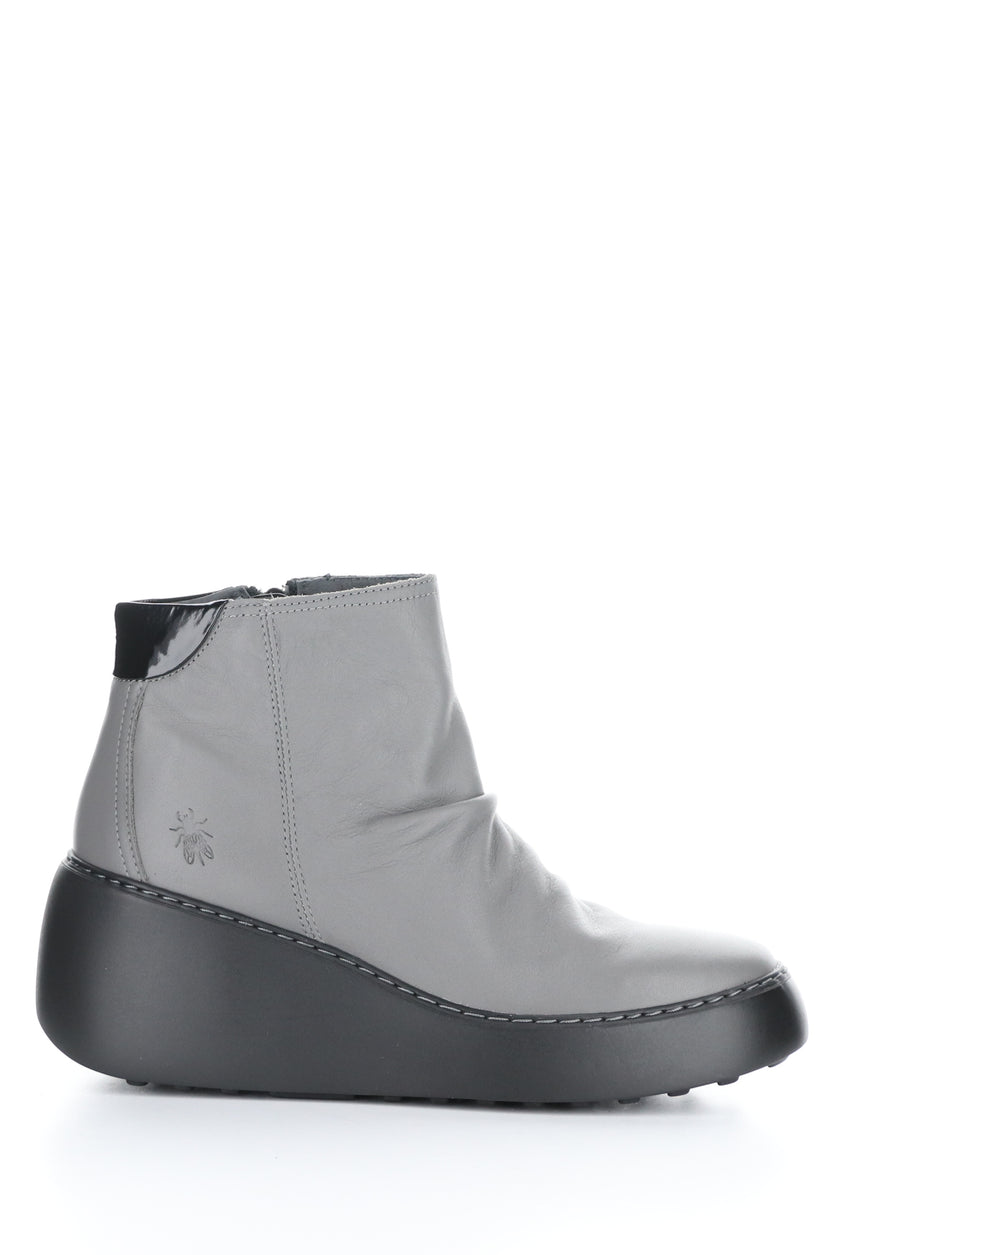 DABE461FLY 007 GREY Round Toe Boots